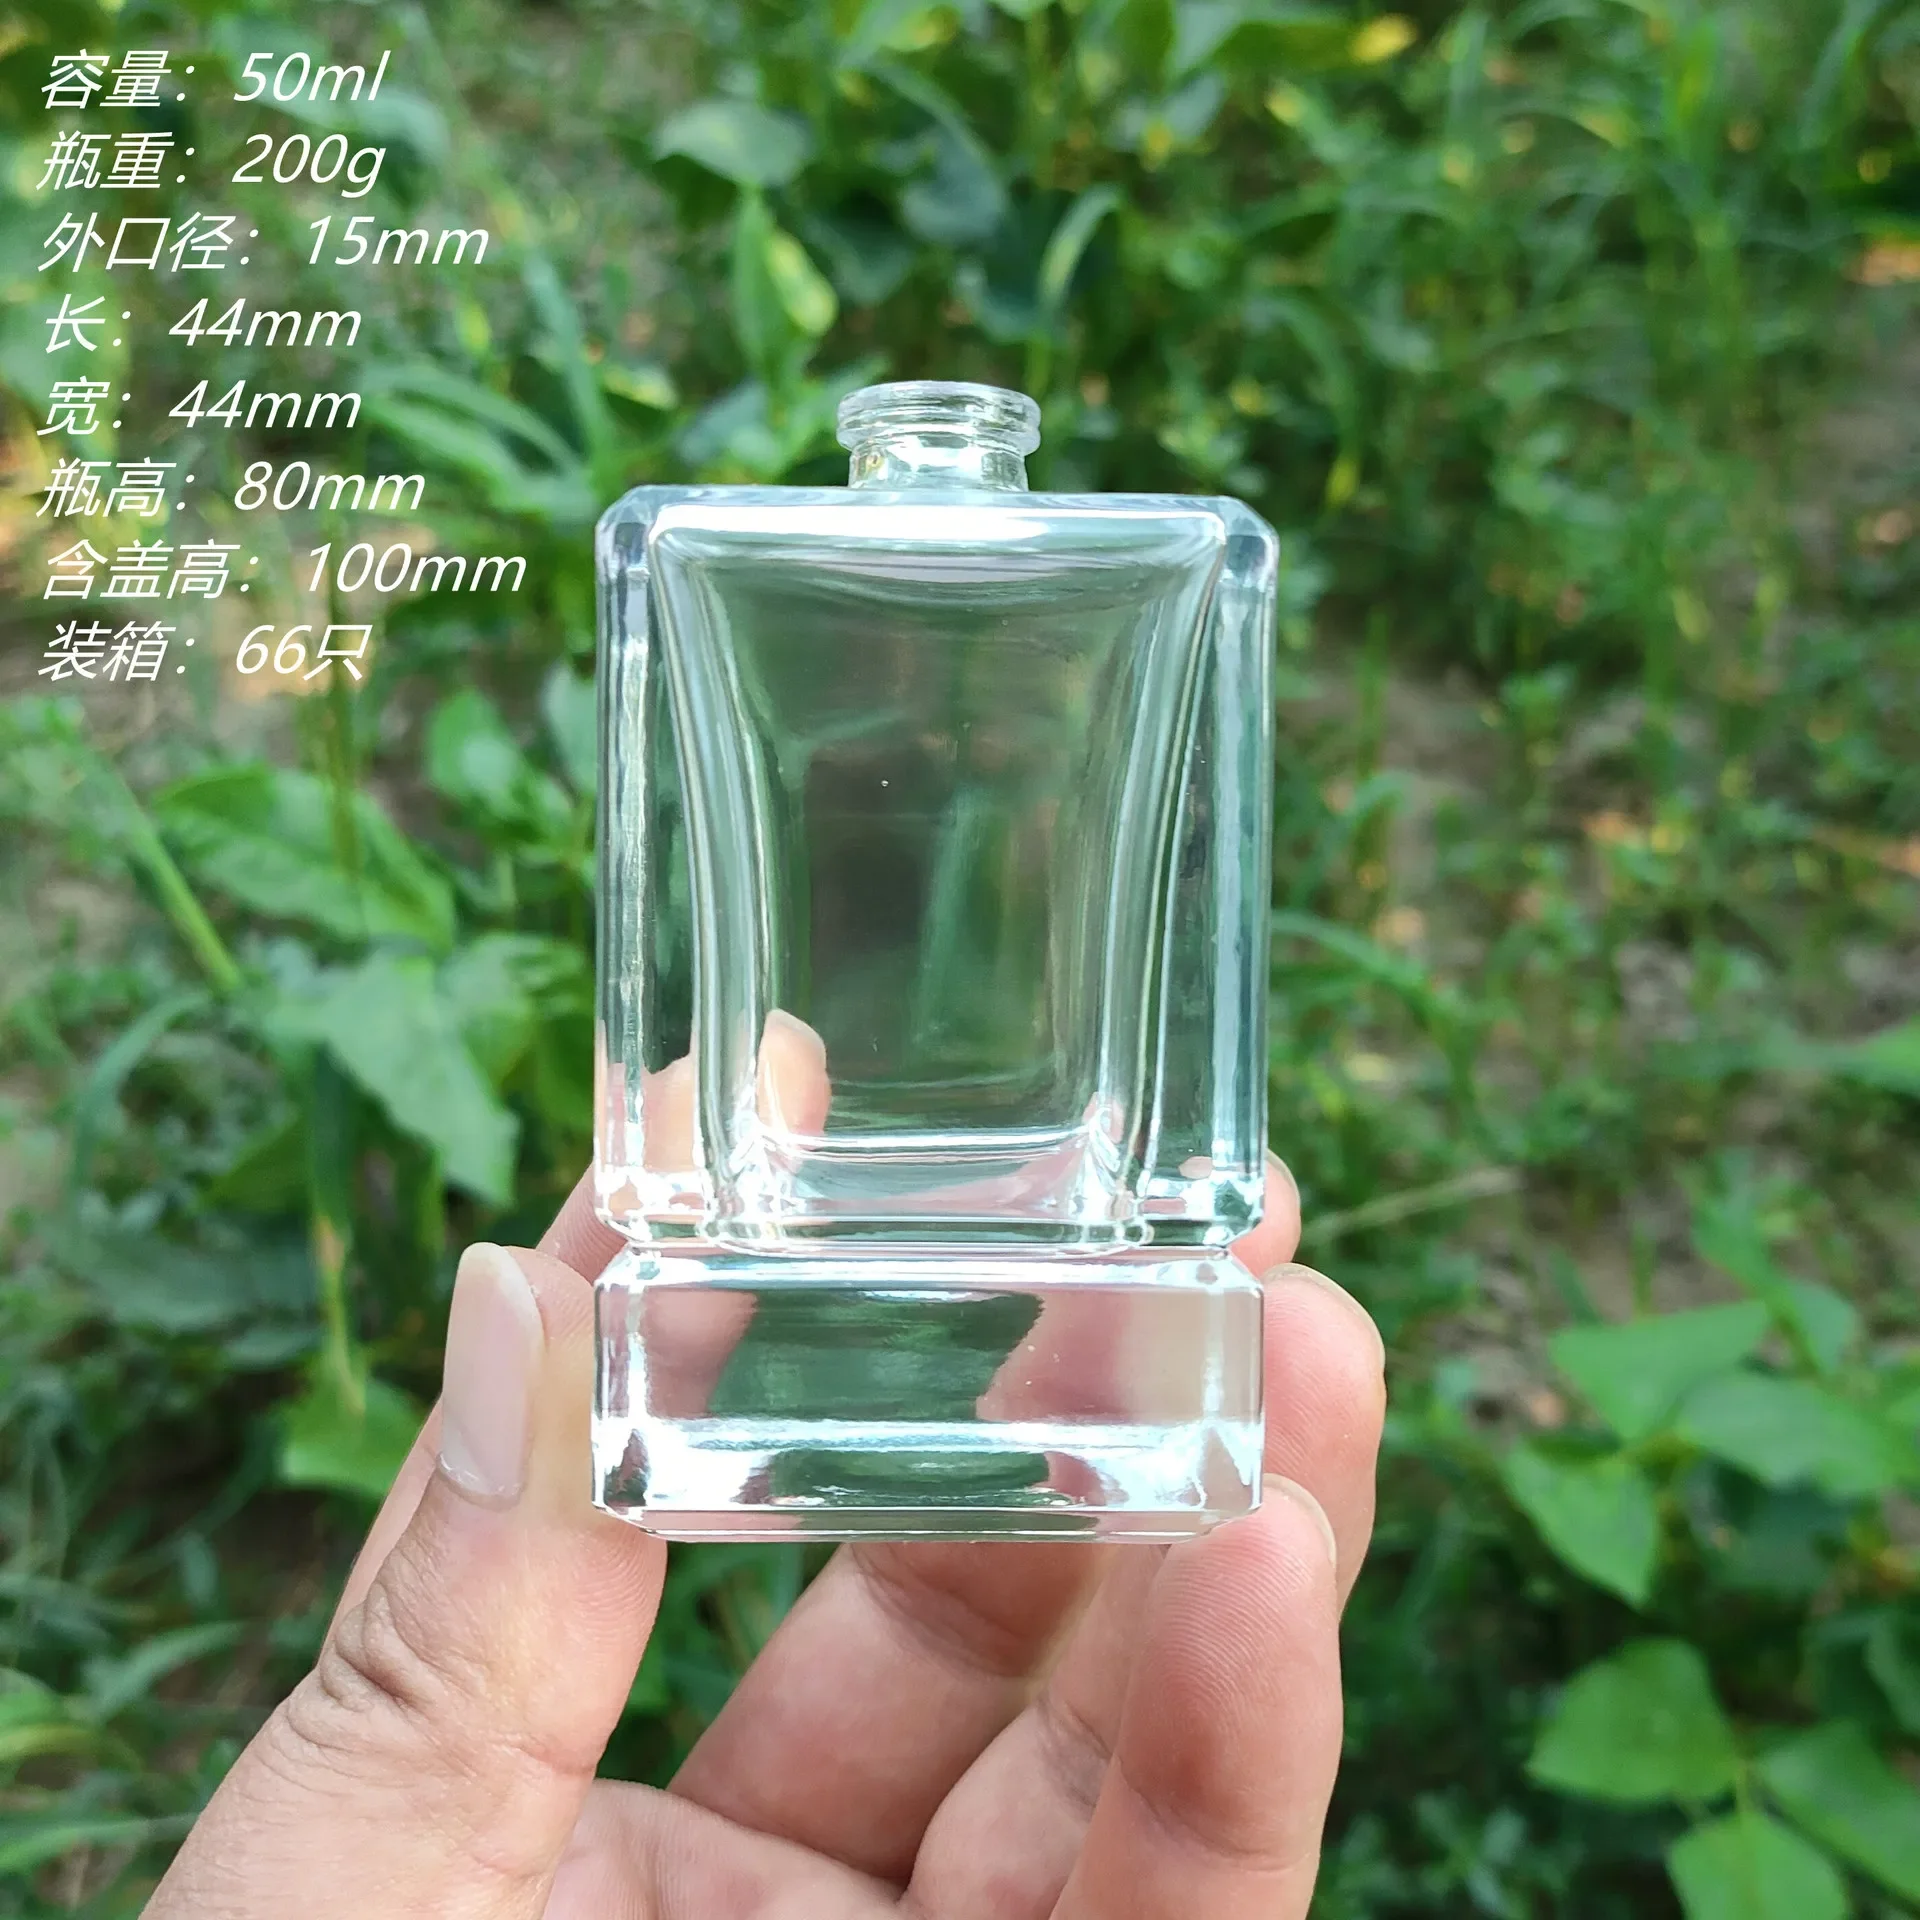 https://ae01.alicdn.com/kf/S21a8cf024c8d4c8fae51cf4ee43b62390/New-50ml-square-perfume-bottle-crystal-white-material-double-section-thick-bottom-perfume-glass-spray-bottle.jpg